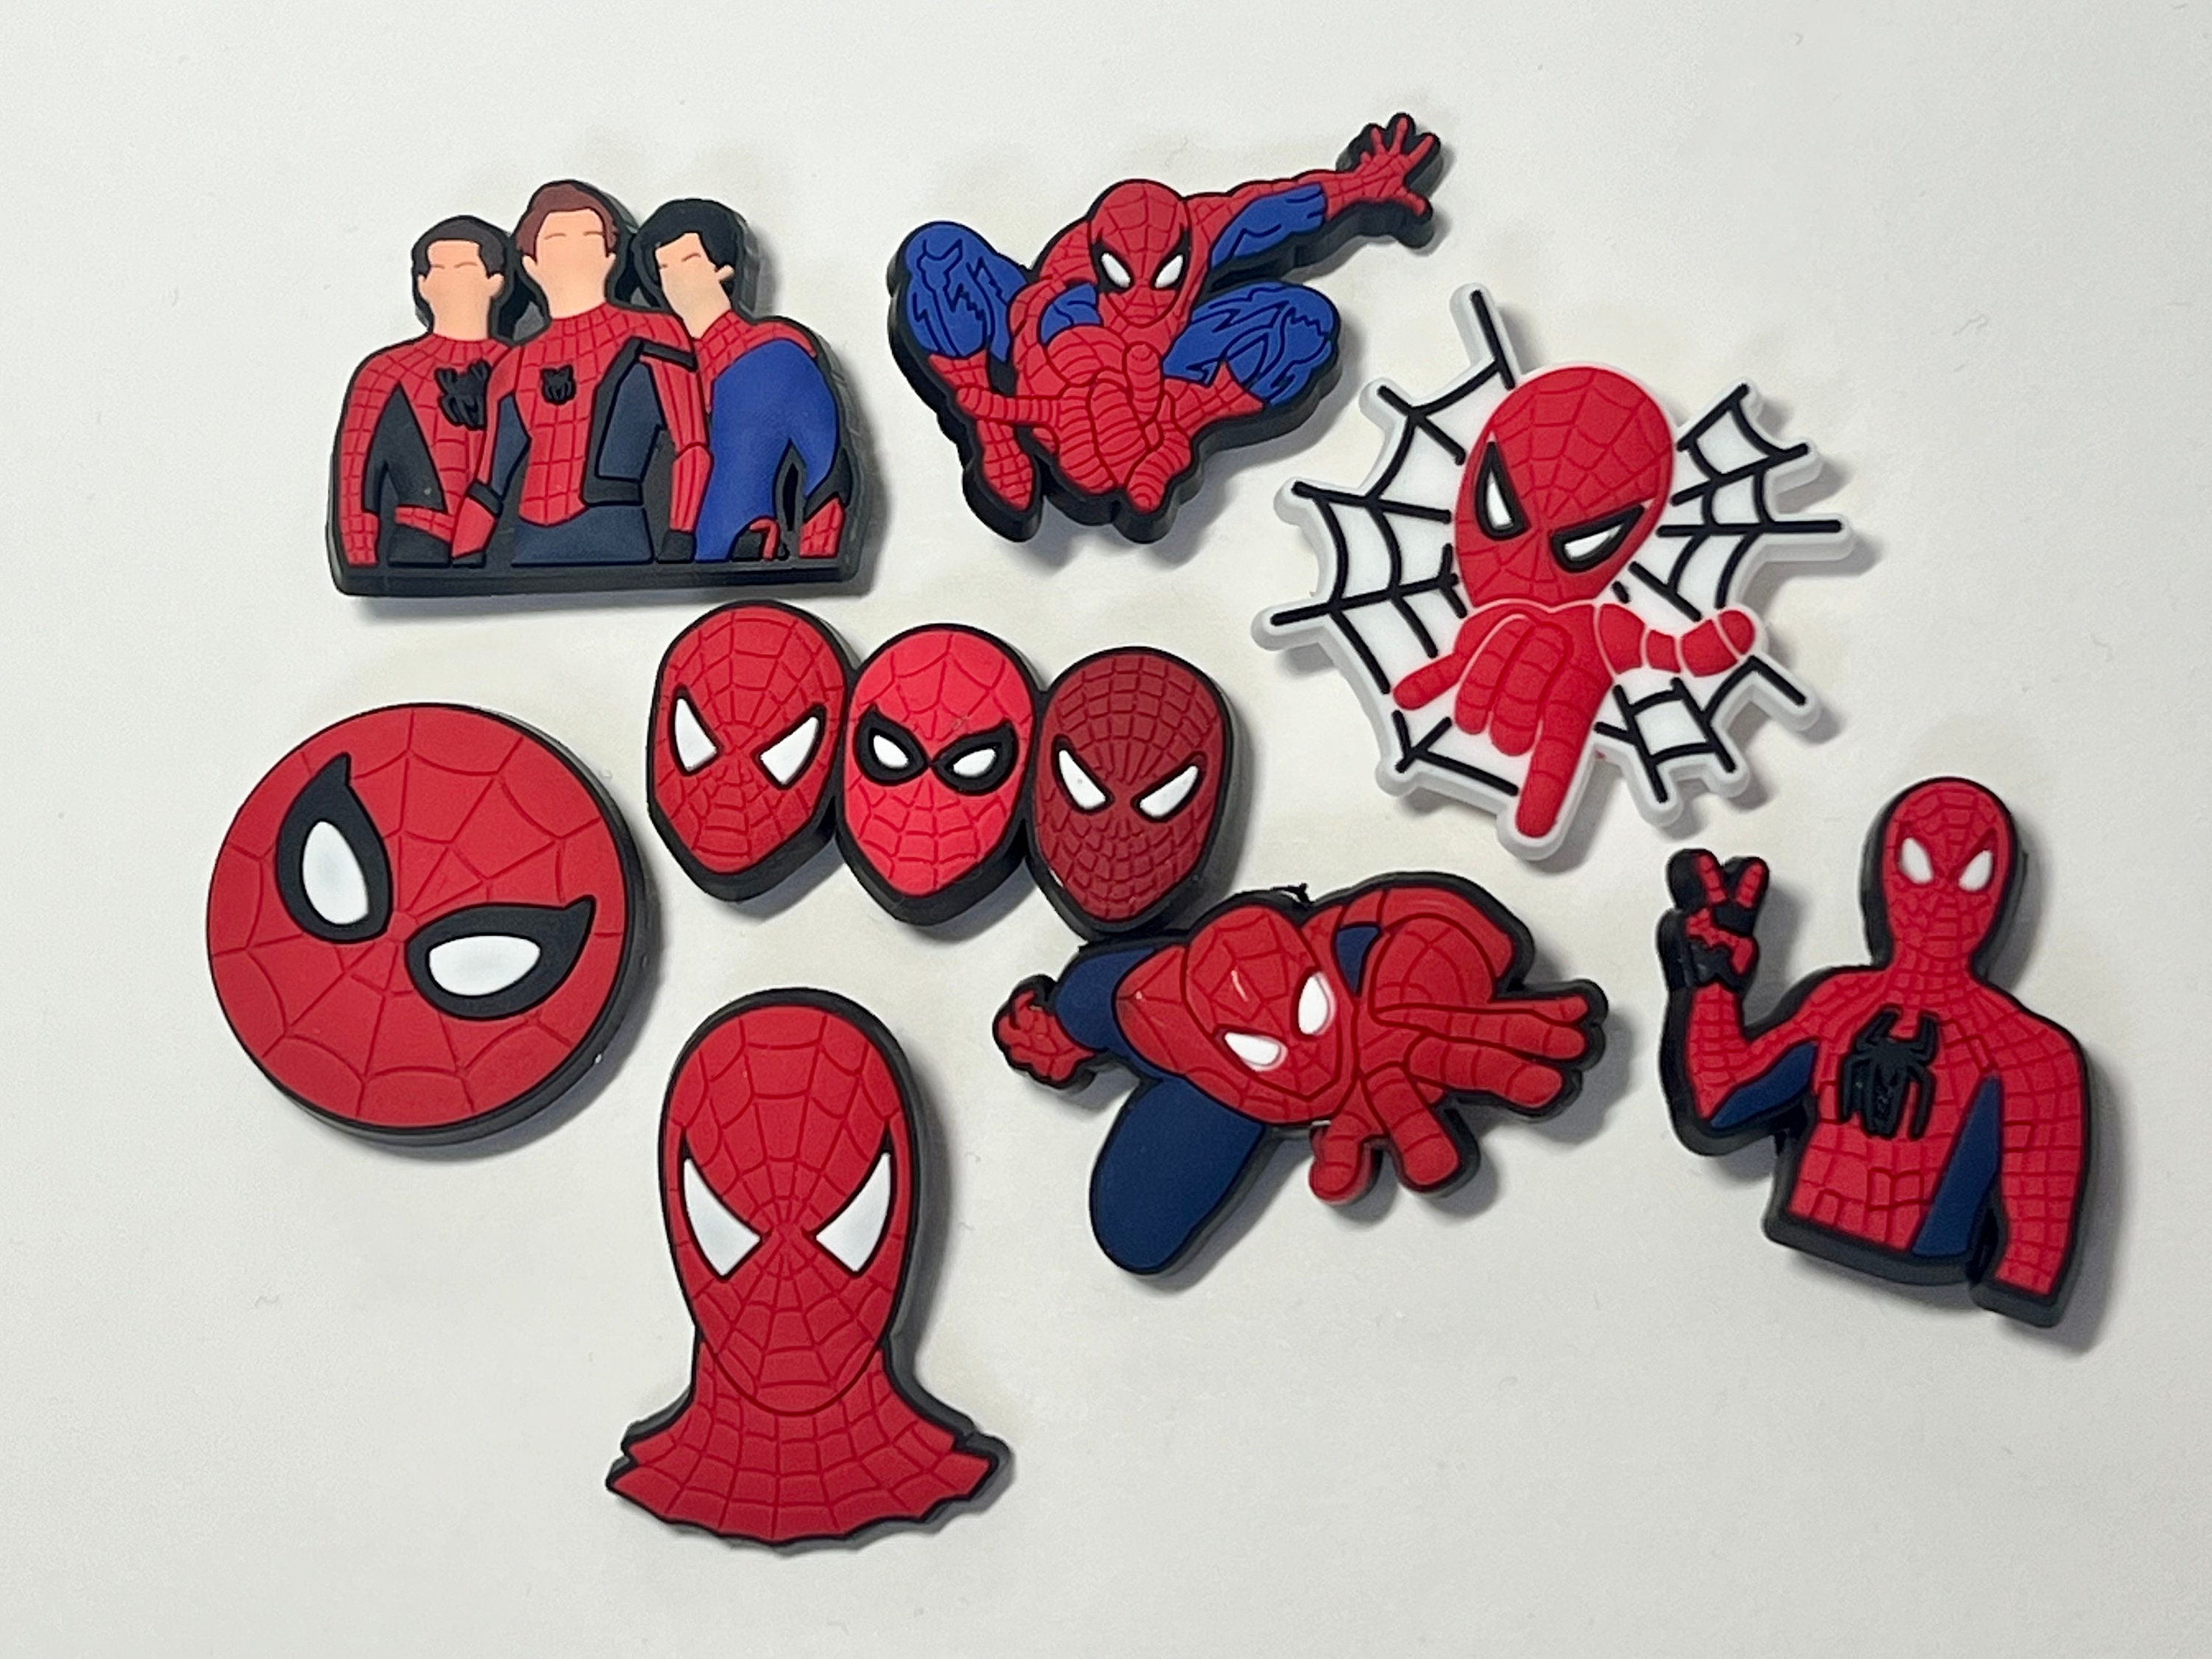 Spider Man Croc Charms crazy creations facebook £2 postage charms 50p